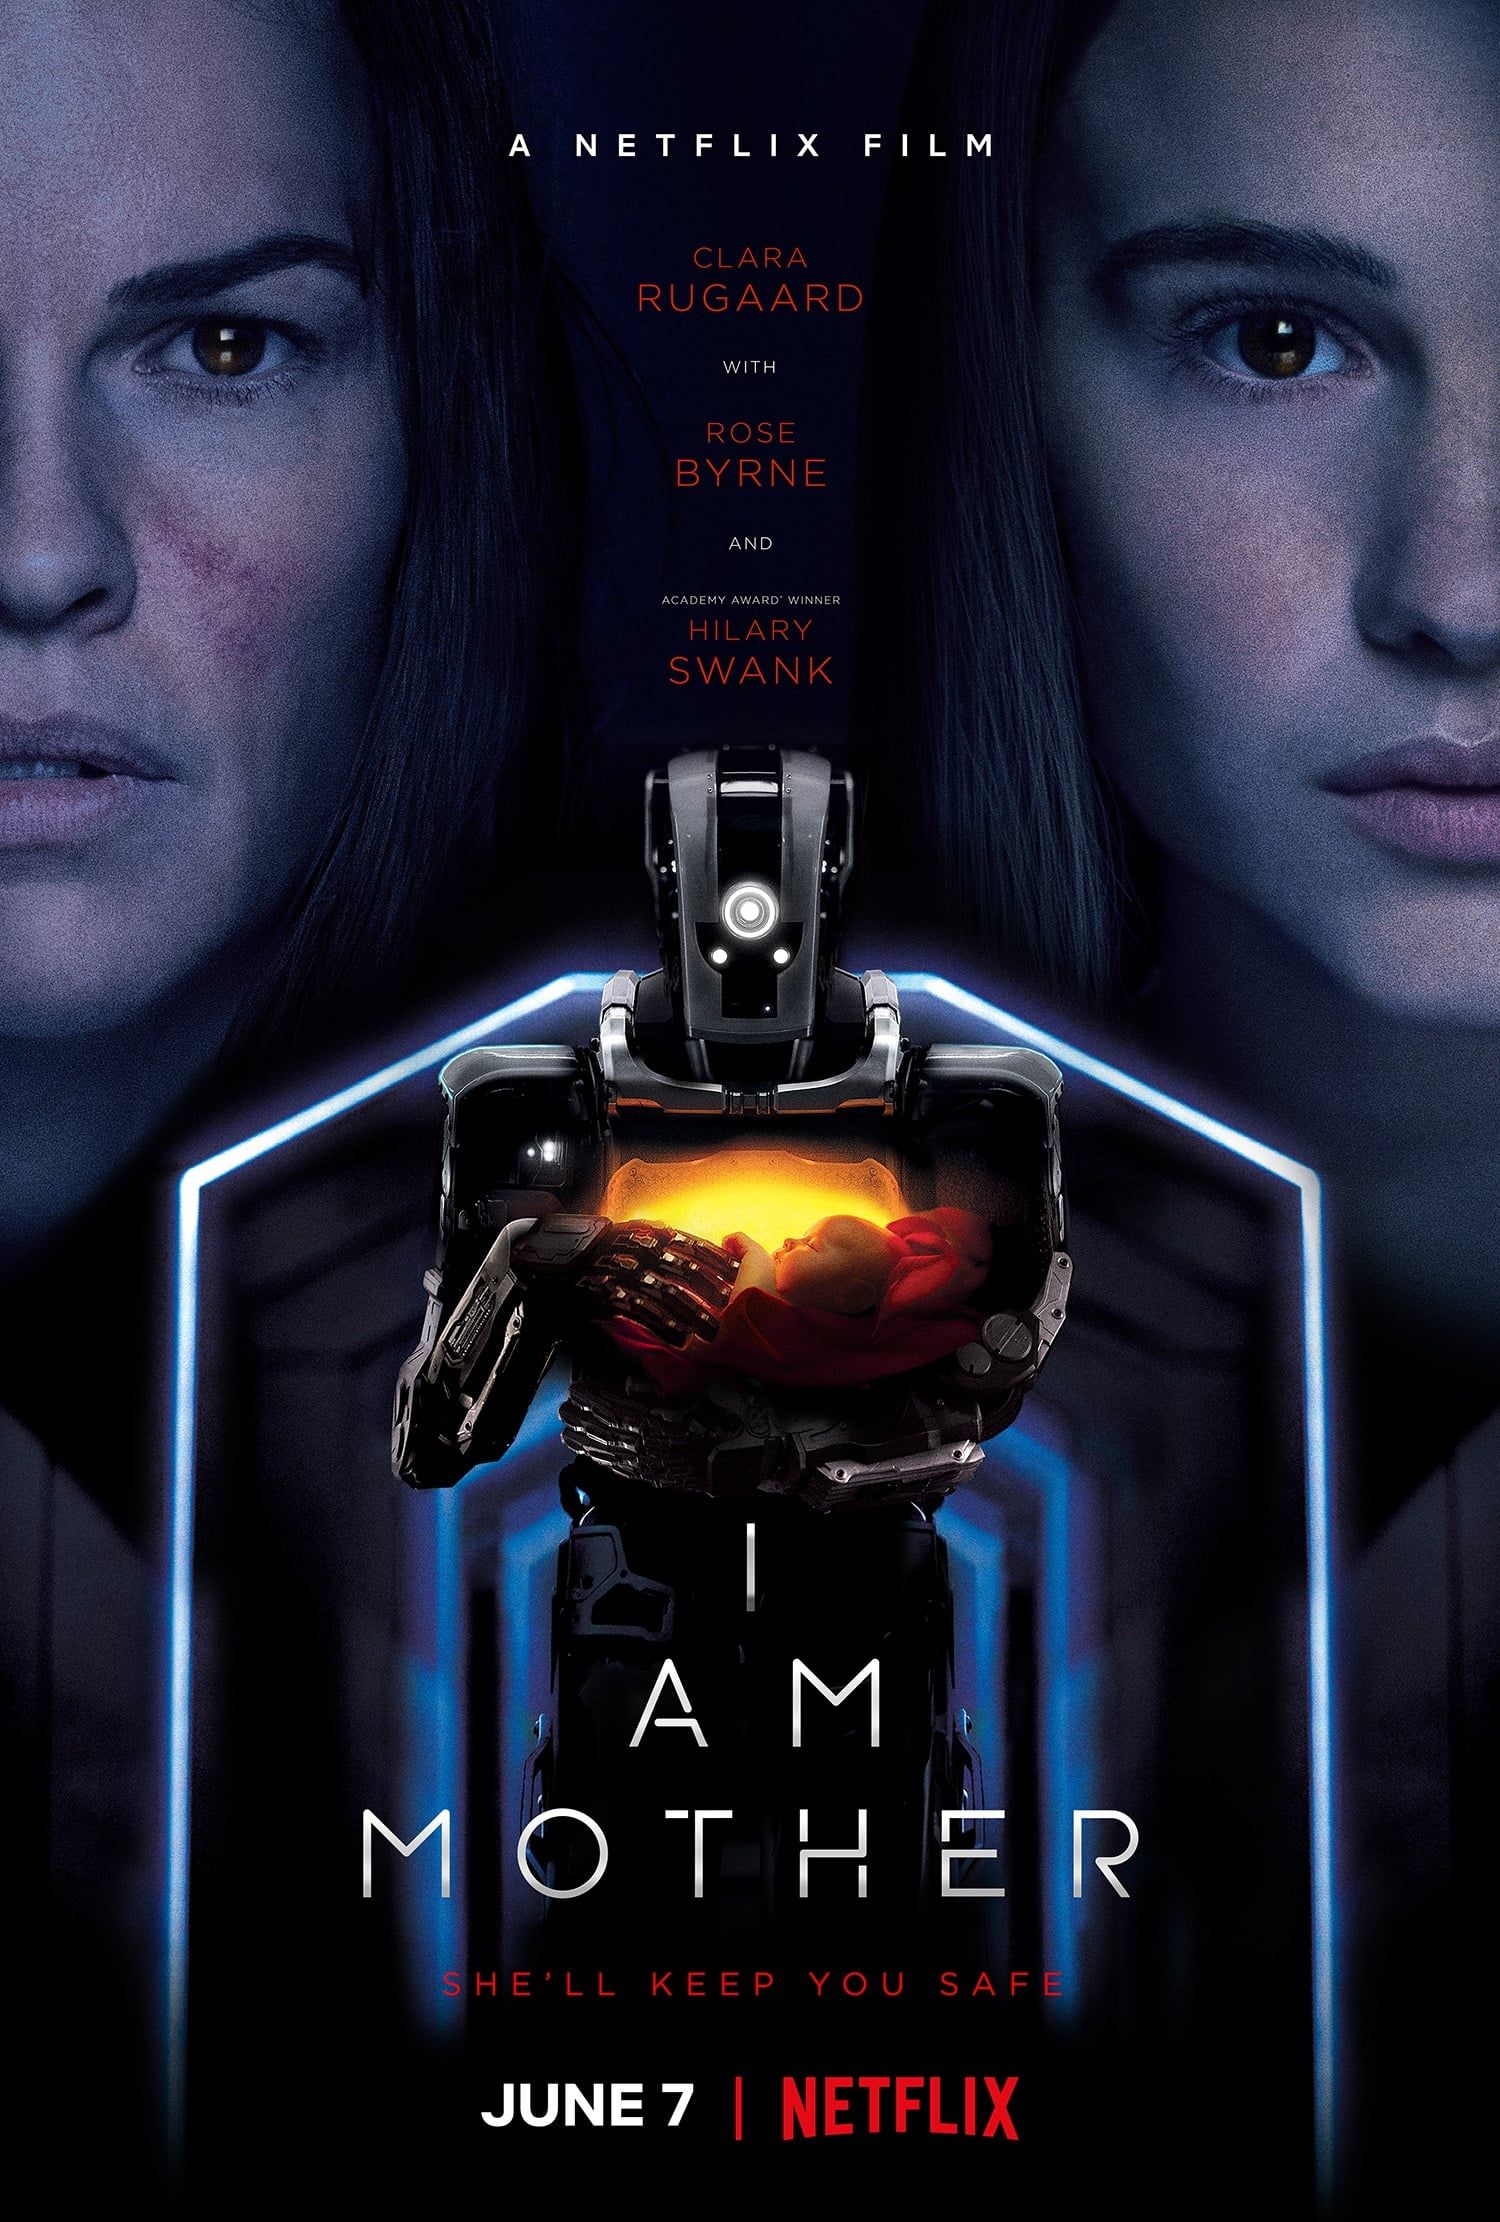 I Am Mother - Film (2019) streaming VF gratuit complet